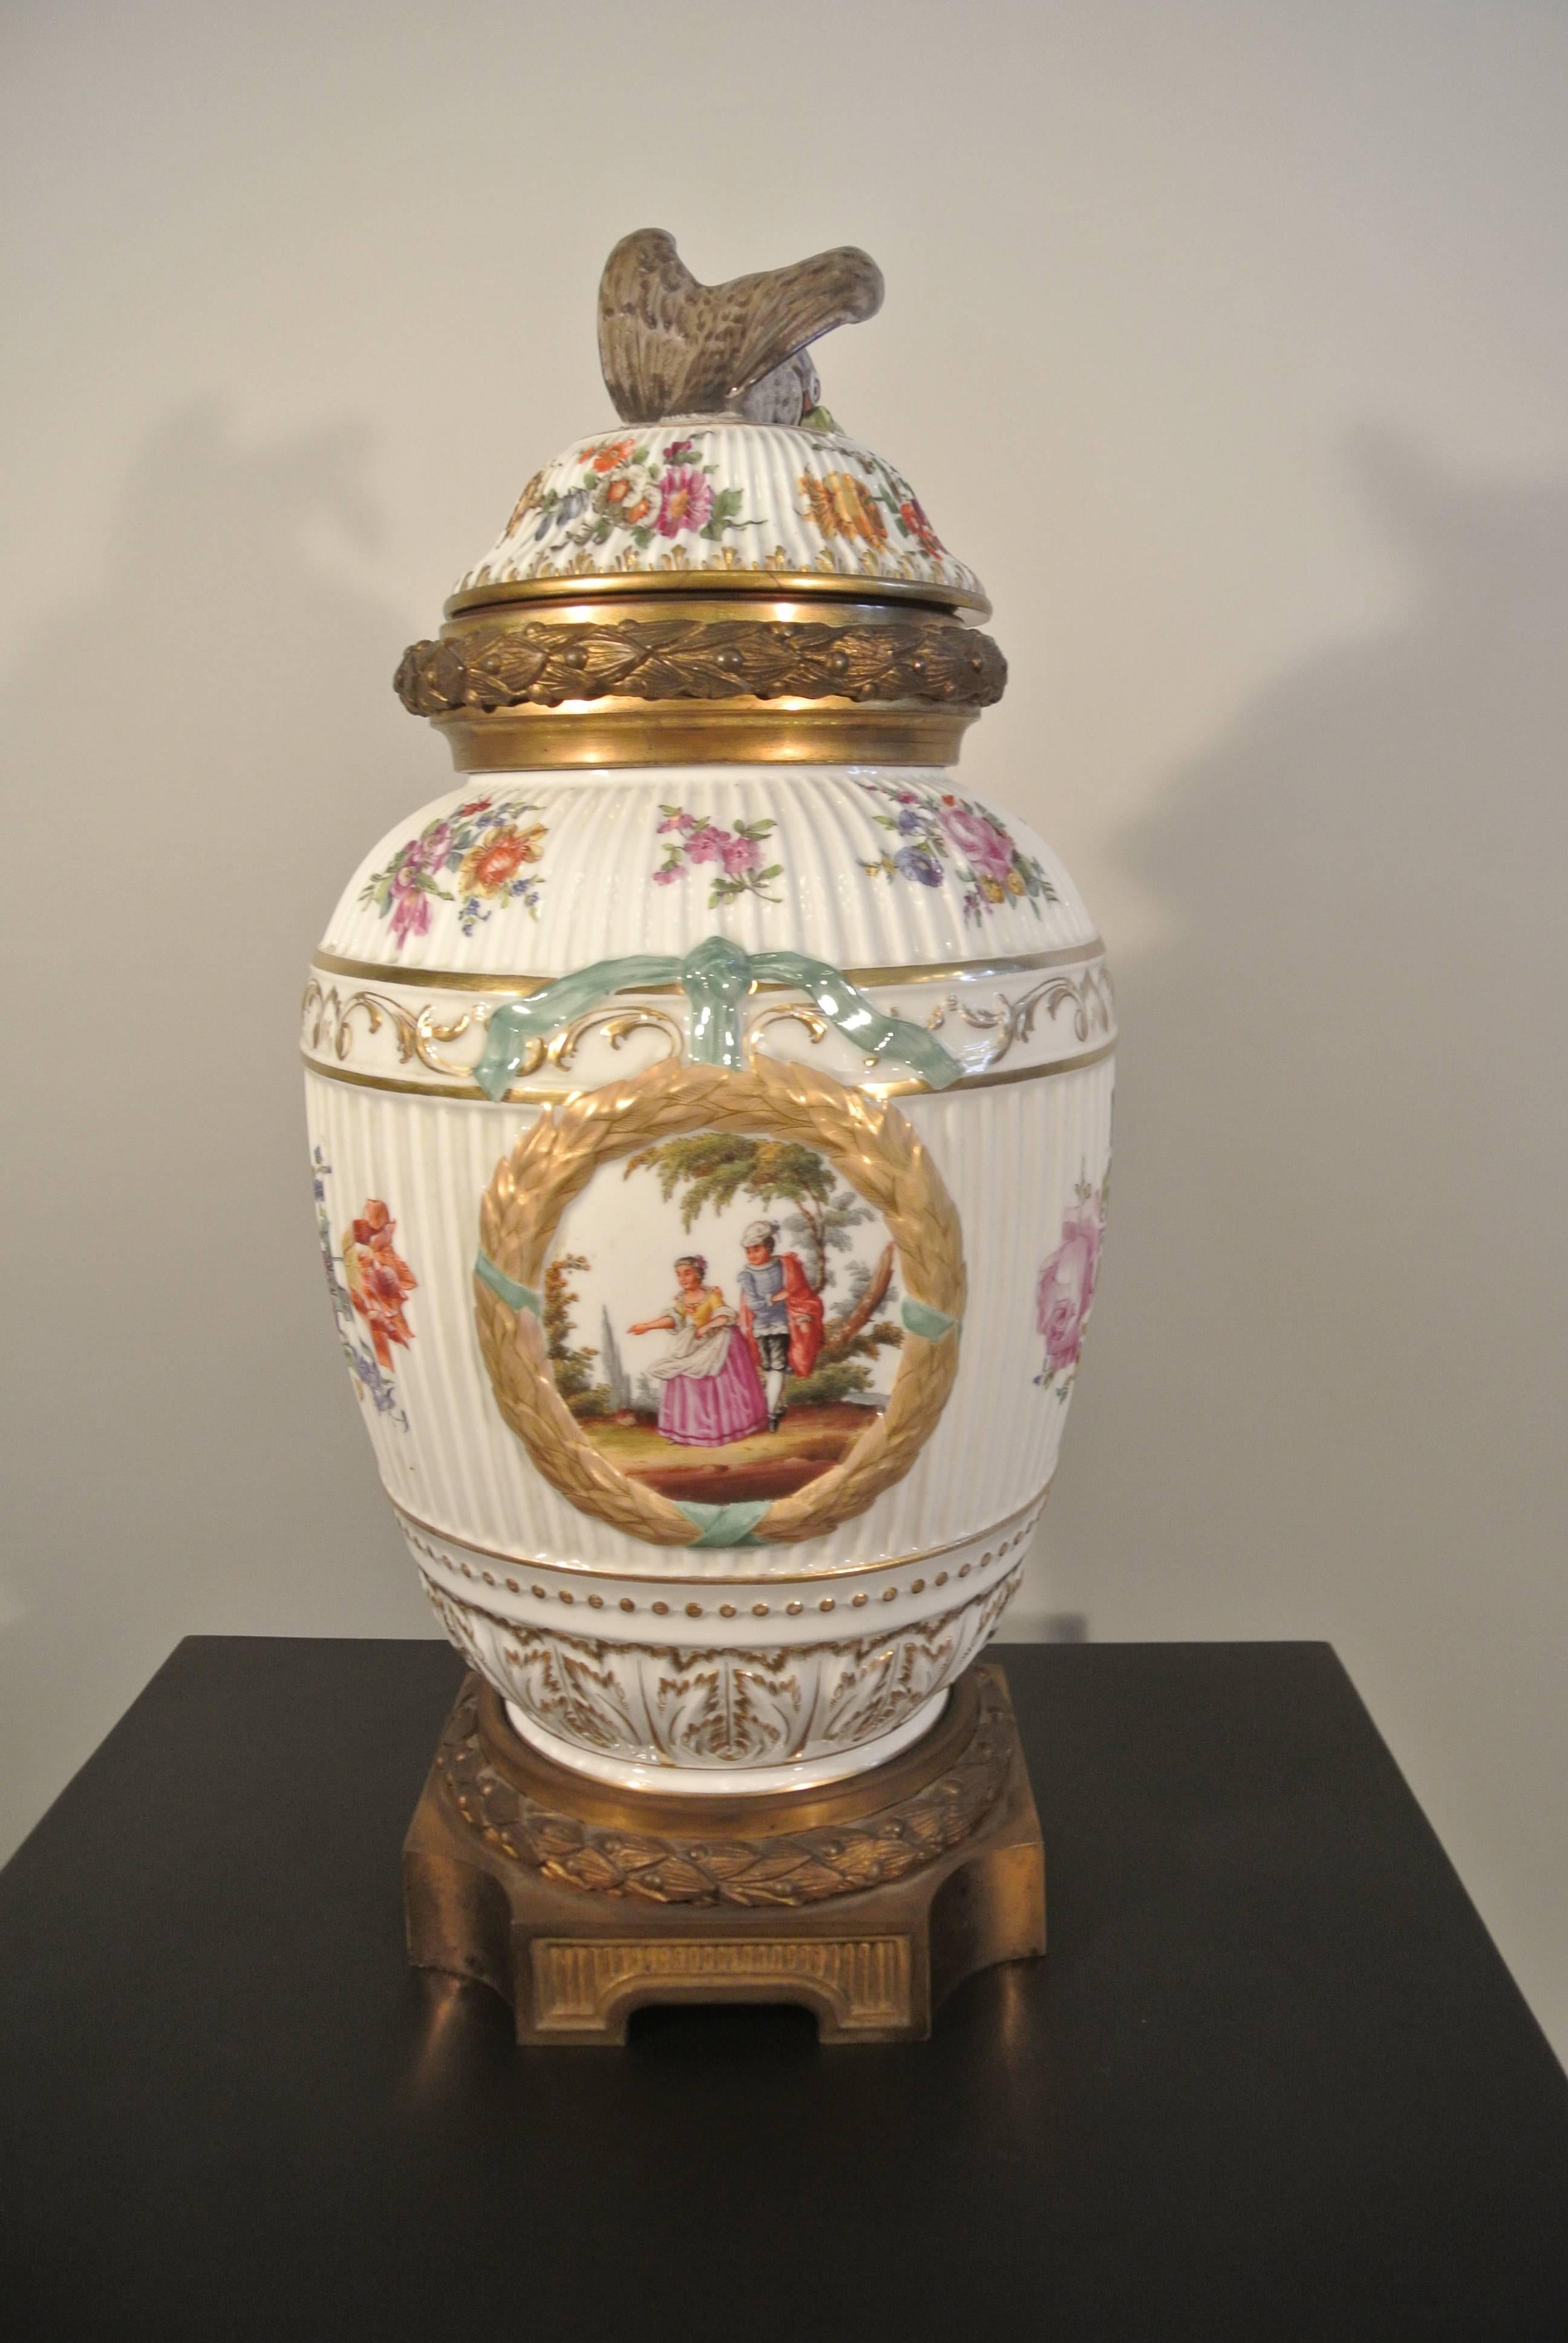 Late 19th Century Covered Porcelain Bronze on Gilded Bronze Base from the 19th Century